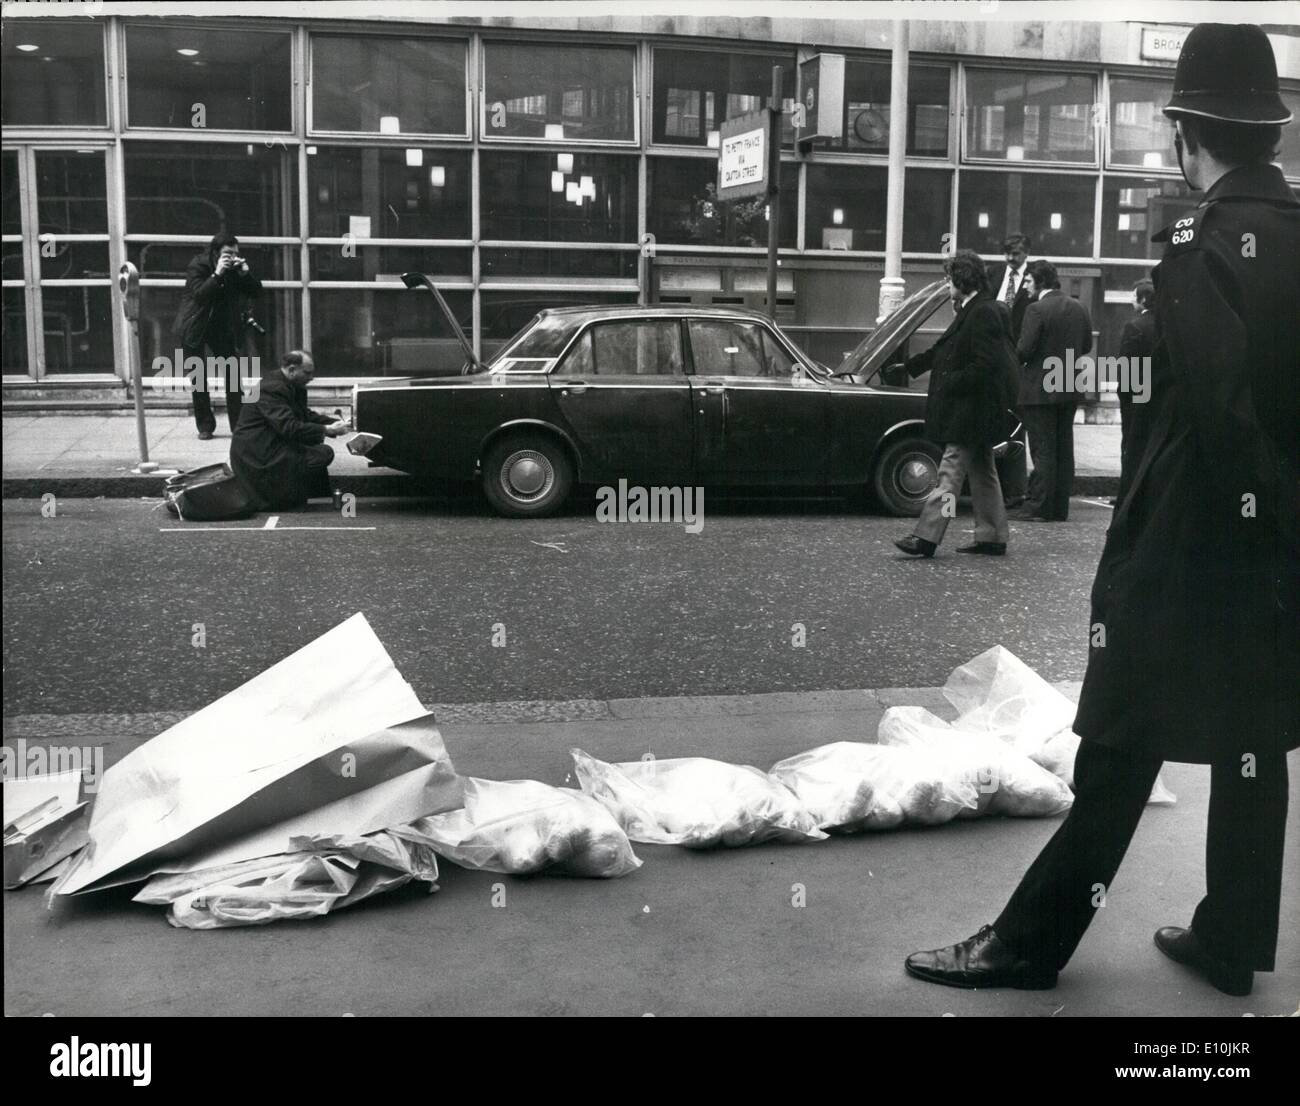 Mar. 03, 1973 - Gelignite found in car at Scotland yard: A bomb containing about 150 lb of gelignite was found in car opposite Scotland Yard today. The car, which had false number plates, was parked in Broadway outside the Post Office. The bomb was defused and the road blocked. Photo shows a police constable stands guard over the sacks of gelignite found inside the car while Scotland Yard men continue to search the car seen in the background outside Scotland Yard today. Stock Photo